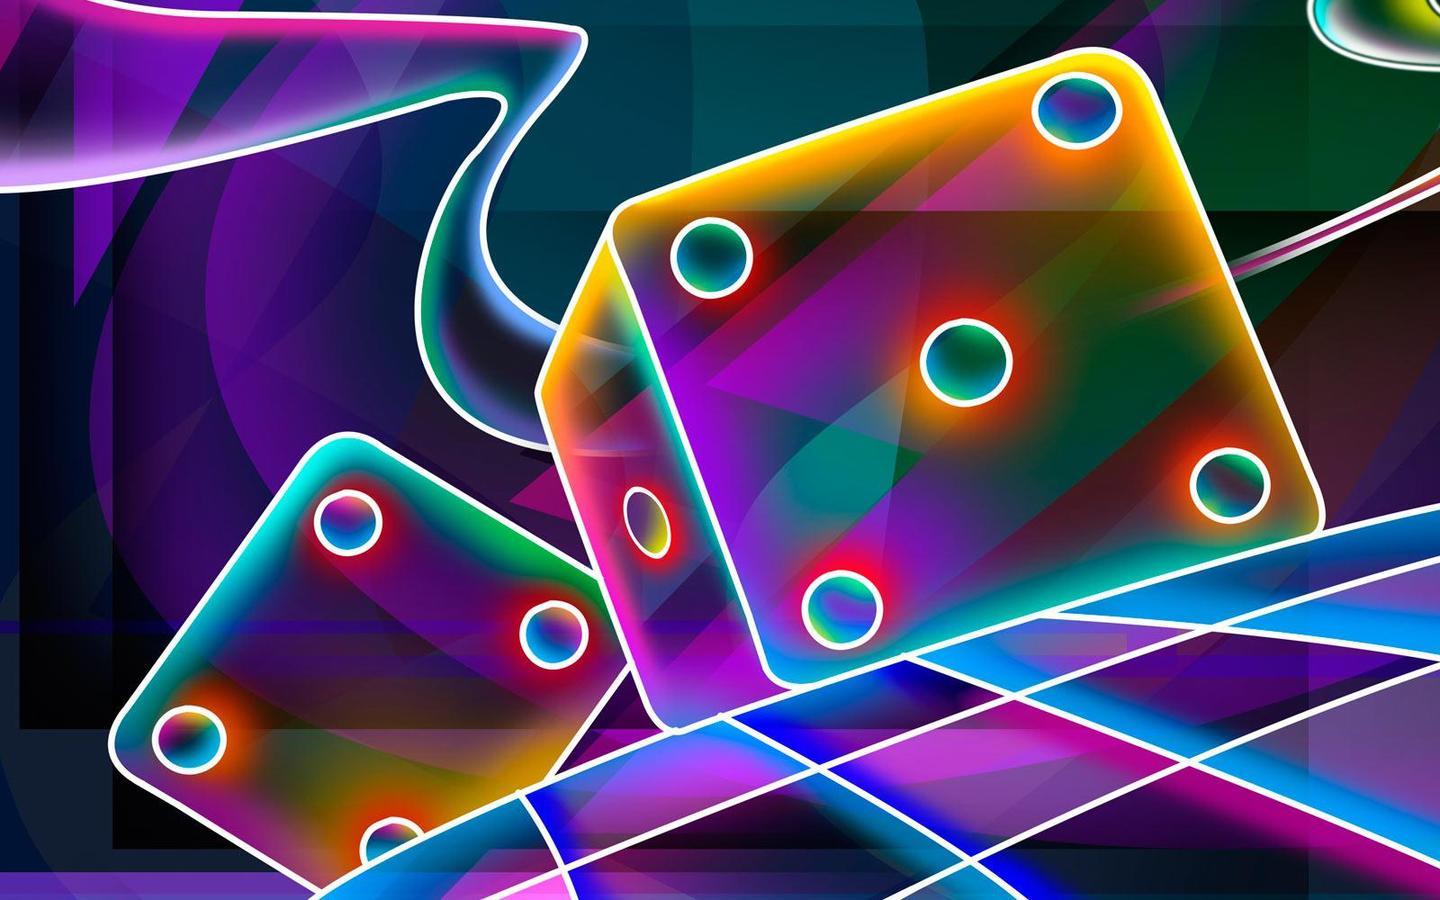 Awesome Neon Backgrounds Designs - Wallpaper Cave